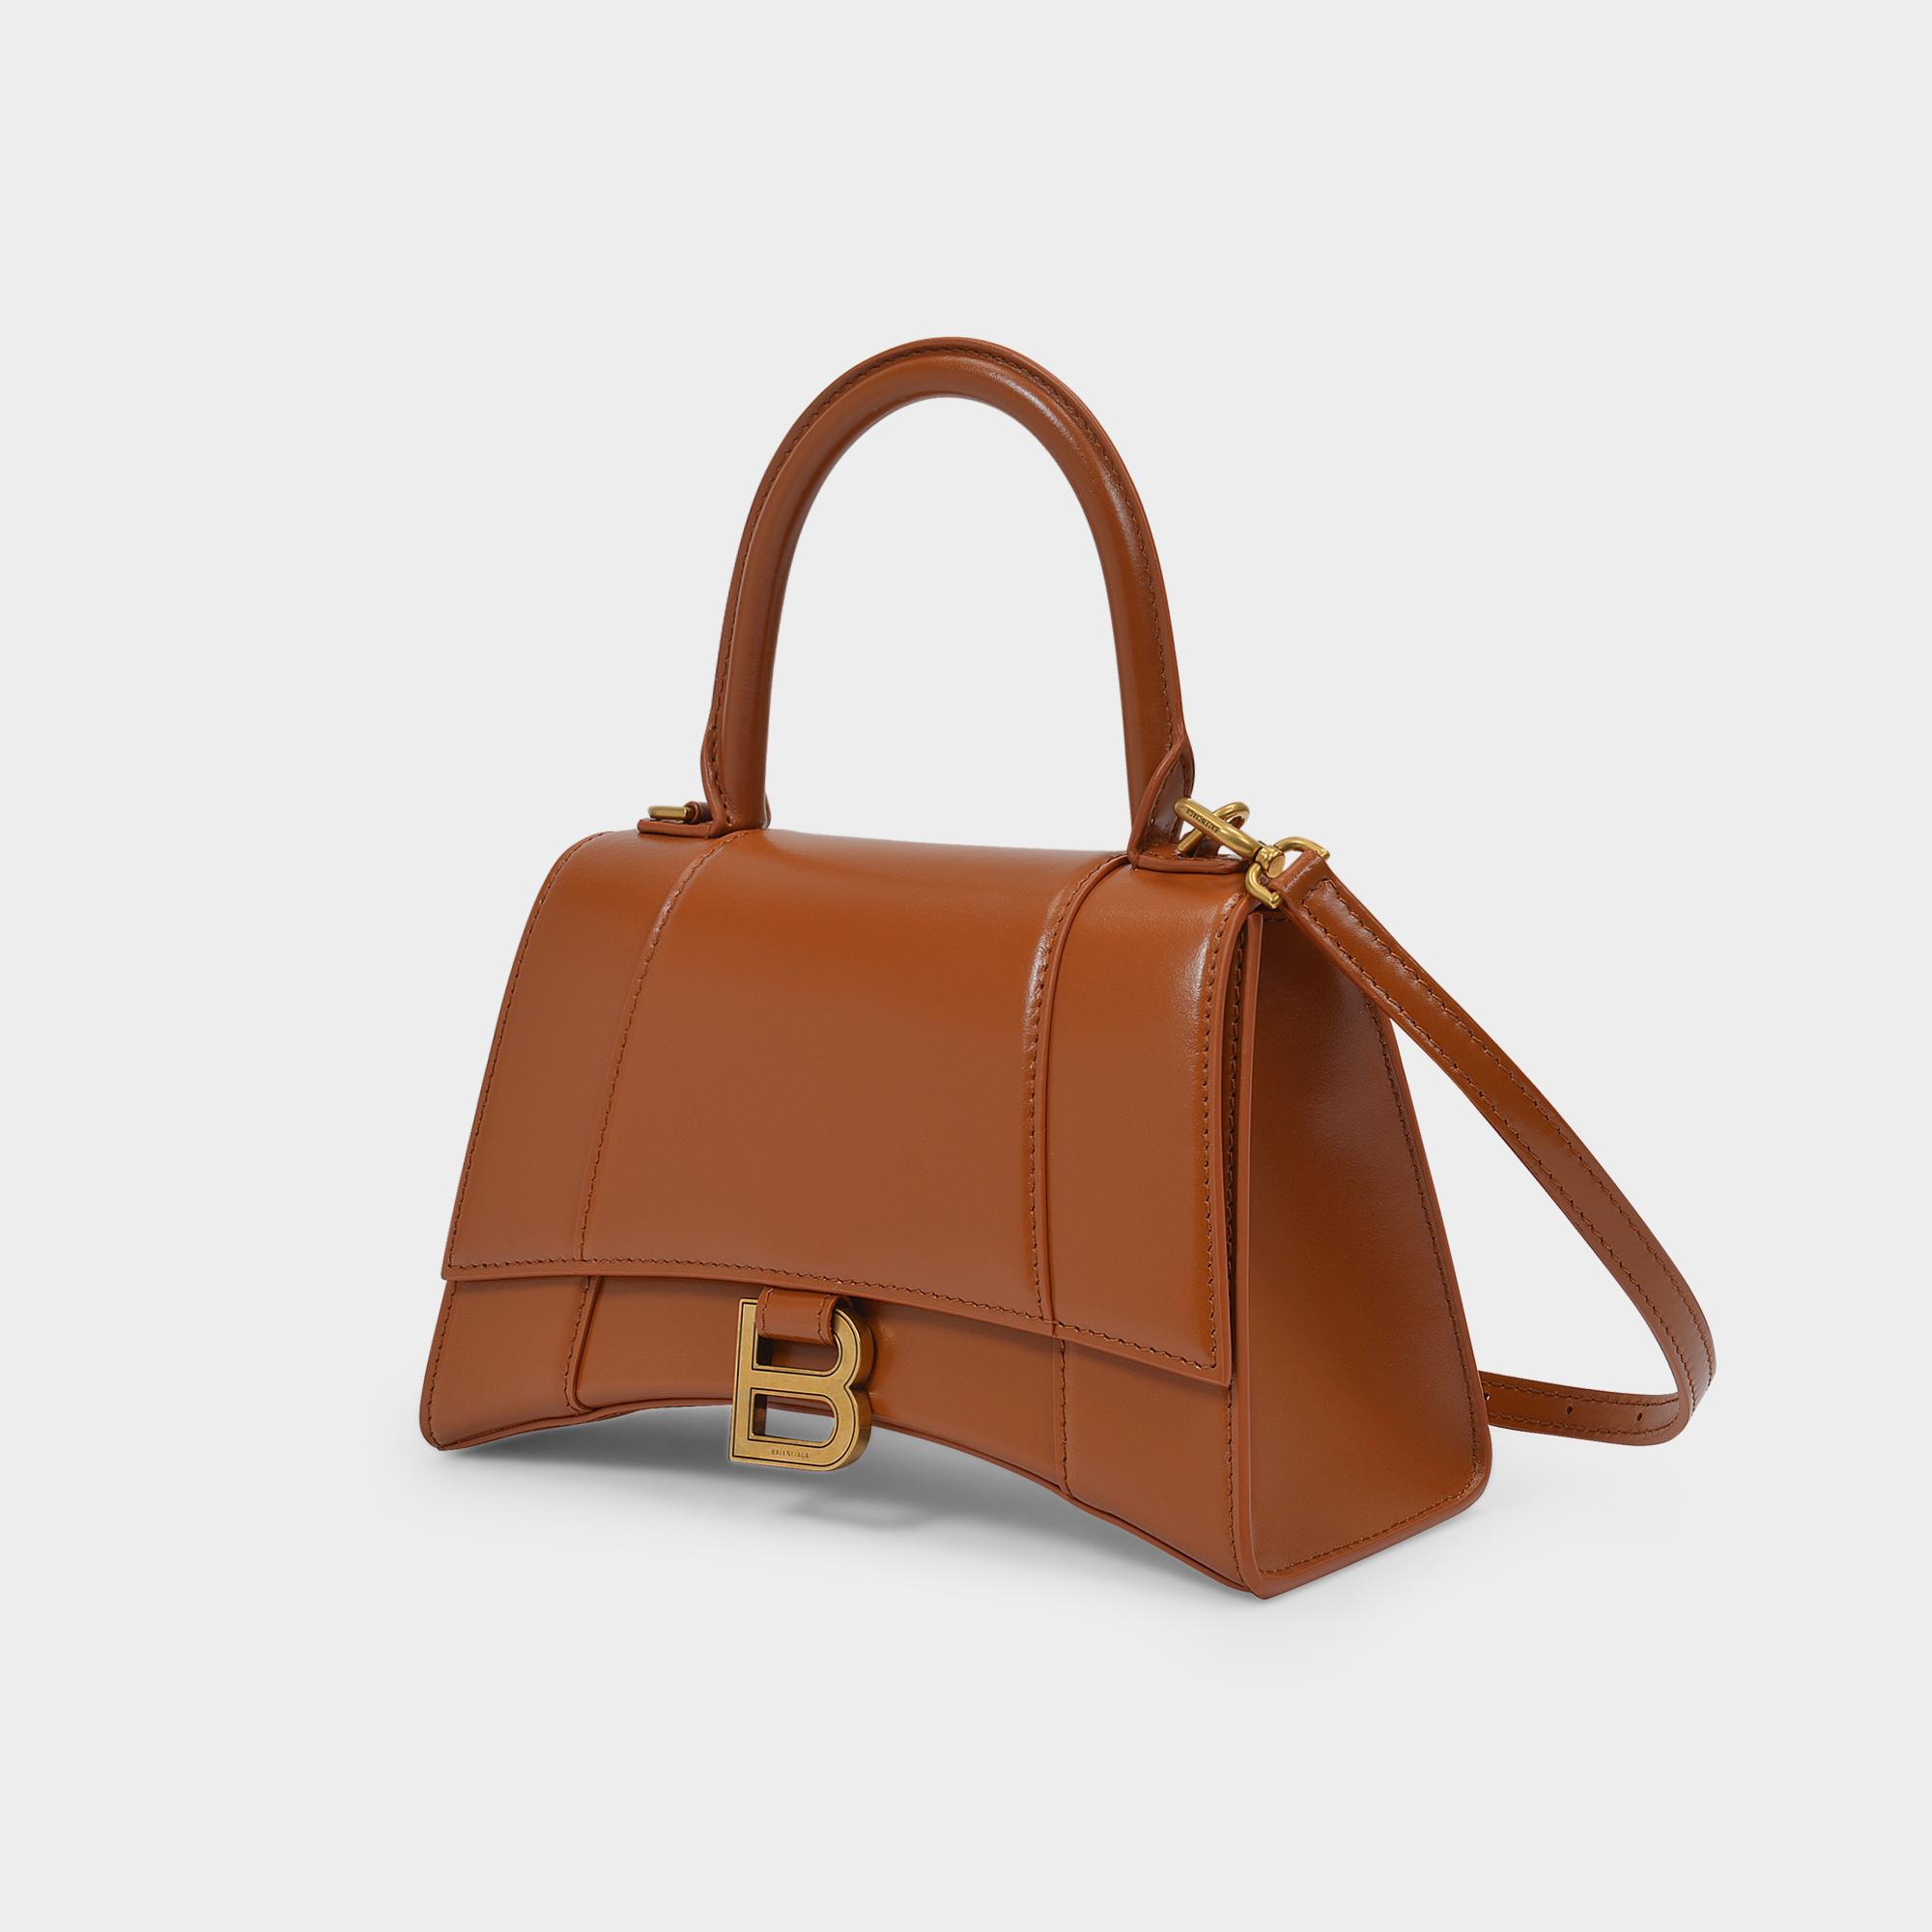 Balenciaga Handbag Hourglass Camel In Shiny Leather in Brown | Lyst